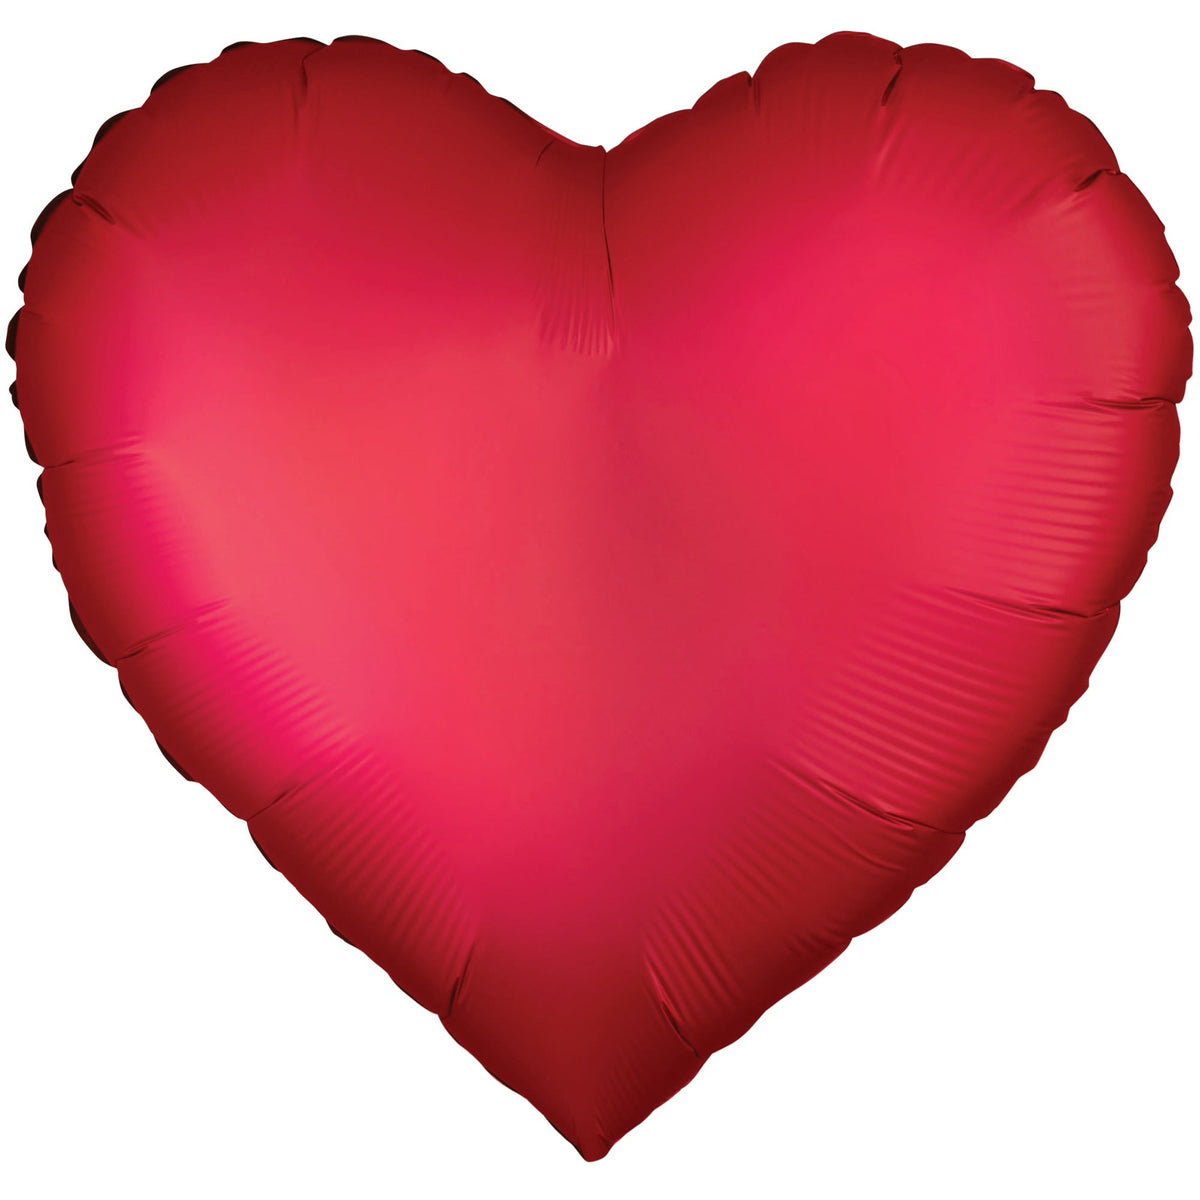 BOOMBA INTERNATIONAL TRADING CO,. LTD Balloons Satin Luxe Red Kiss of Fire Heart Shaped Foil Balloon, 18 Inches, 1 Count 810120710105